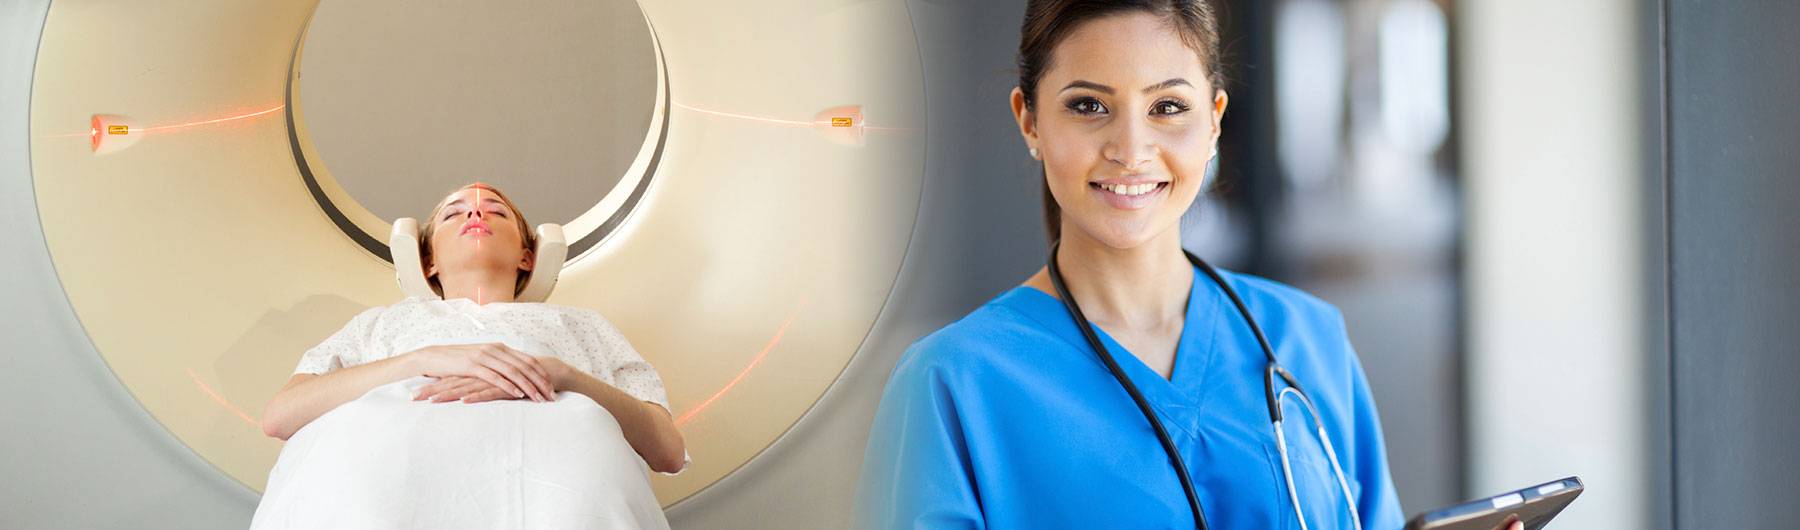 female radiology technologist smiling and patient going through MRI machine.